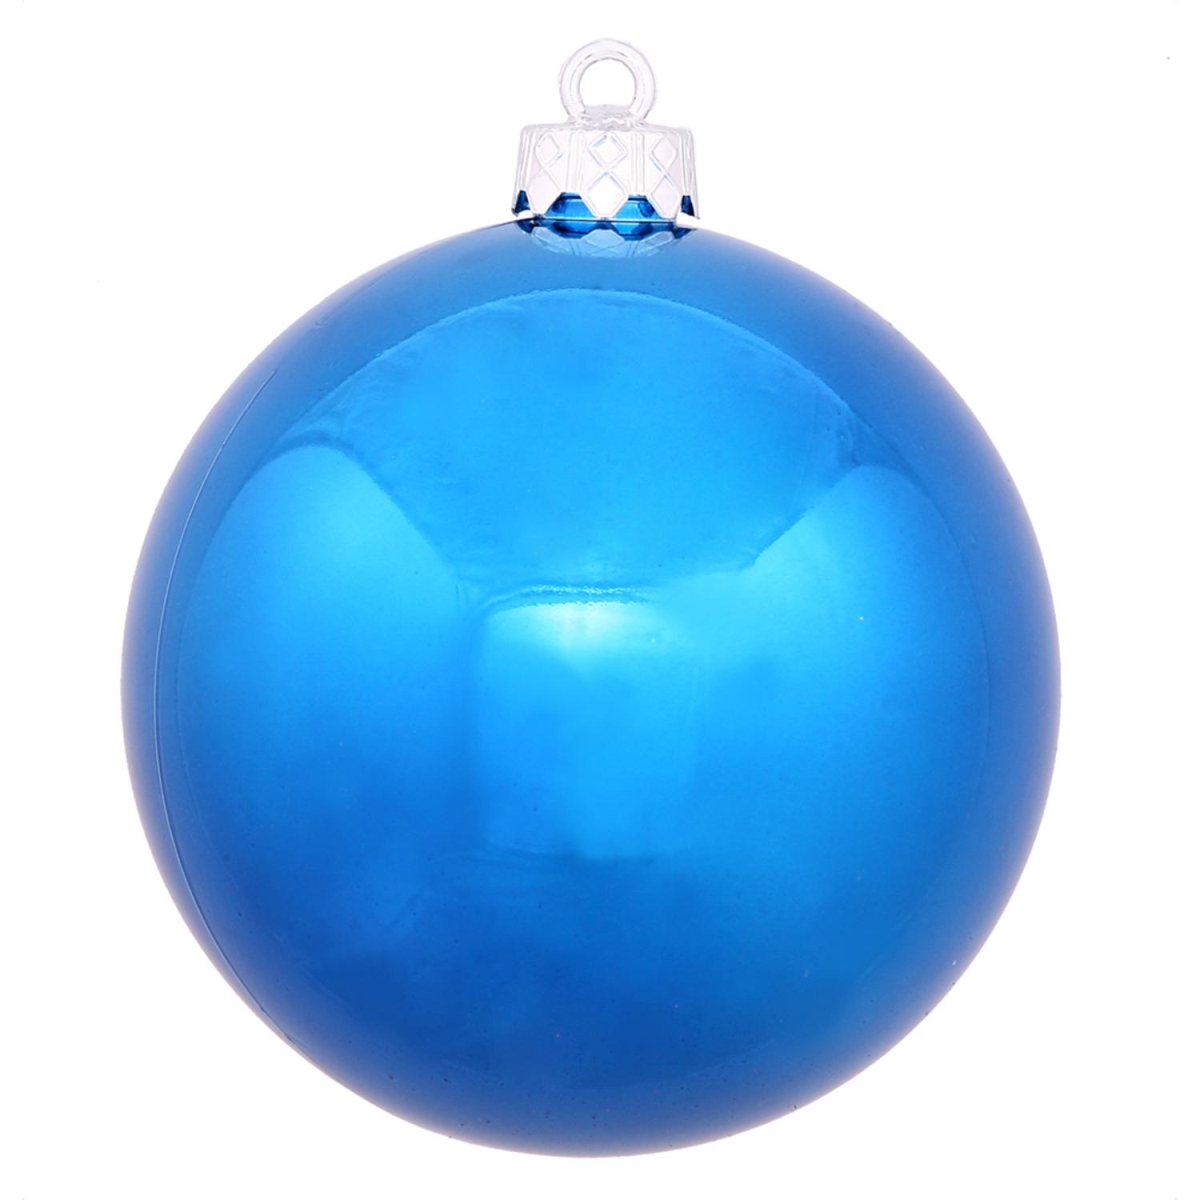 31749088 Shiny Blue Uv Resistant Commercial Drilled Shatterproof Christmas Ball Ornament - 2.75 In.